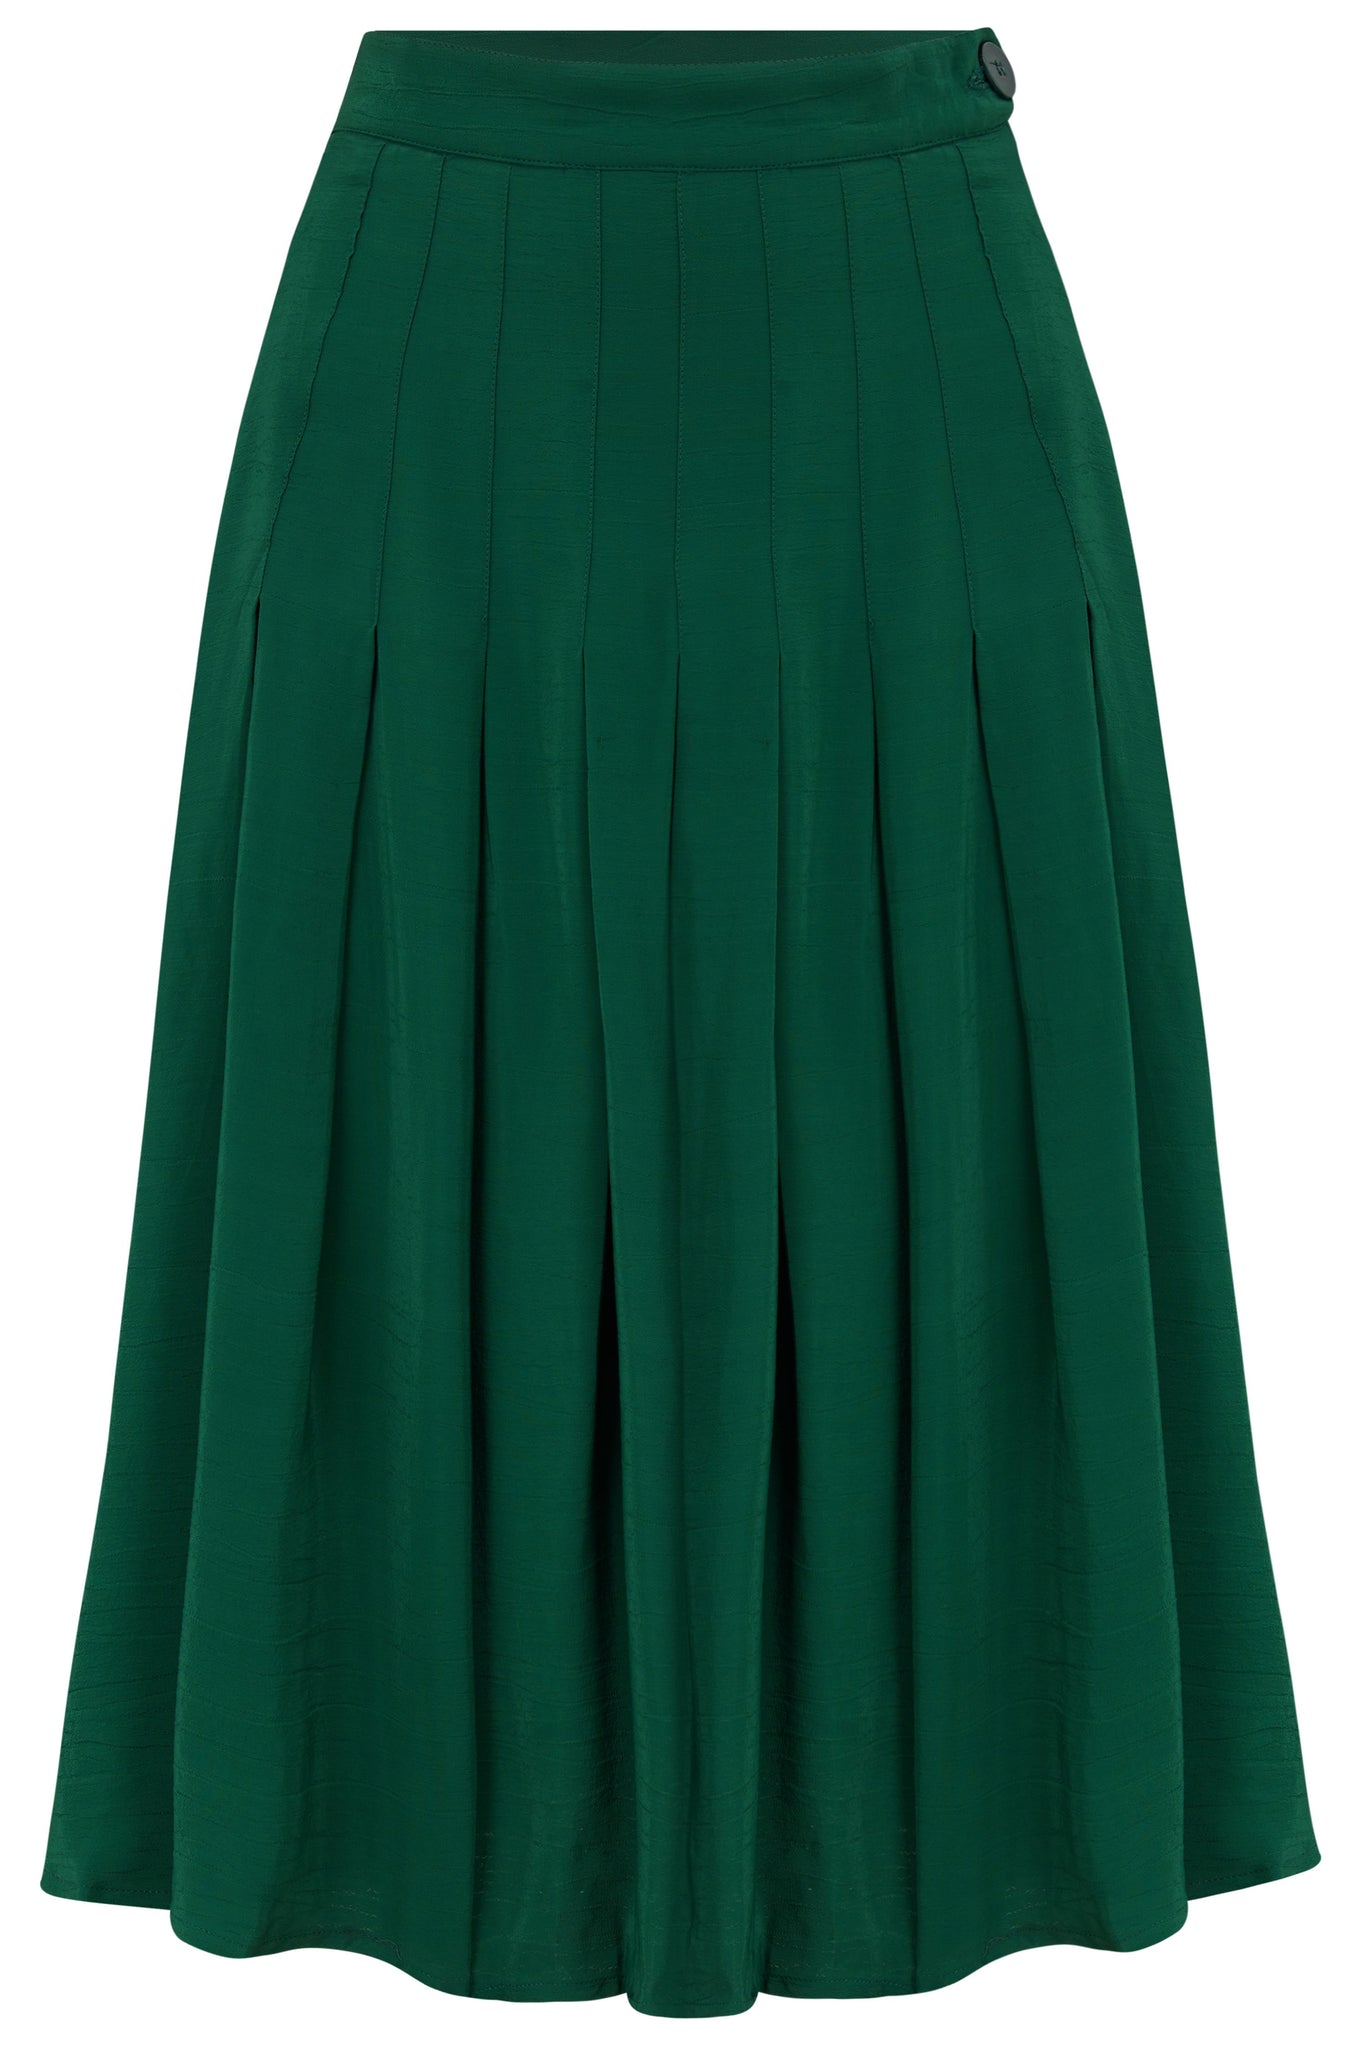 The "Lucille" Pleated Skirt in Solid Green, Classic & Authentic 1940s Vintage Inspired Style - True and authentic vintage style clothing, inspired by the Classic styles of CC41 , WW2 and the fun 1950s RocknRoll era, for everyday wear plus events like Goodwood Revival, Twinwood Festival and Viva Las Vegas Rockabilly Weekend Rock n Romance The Seamstress Of Bloomsbury